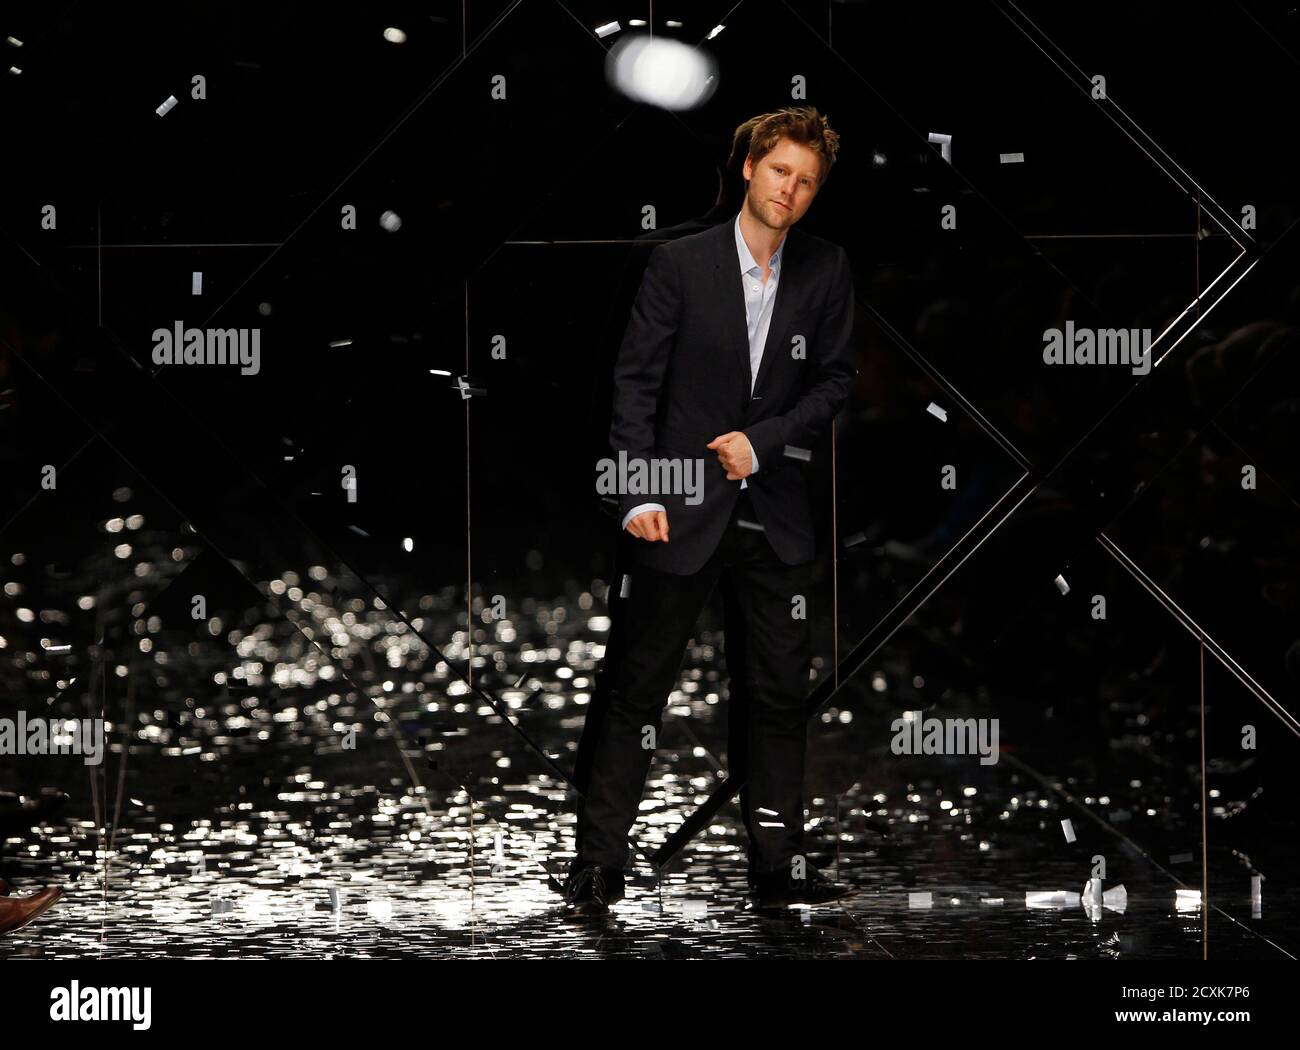 Christopher Bailey, creative director of the British fashion house Burberry, walks on the catwalk after the presentation of the Burberry Prorsum 2011 Spring/Summer collection at London Fashion Week September 21, 2010. REUTERS/Suzanne Plunkett (BRITAIN - Tags: FASHION) Stock Photo